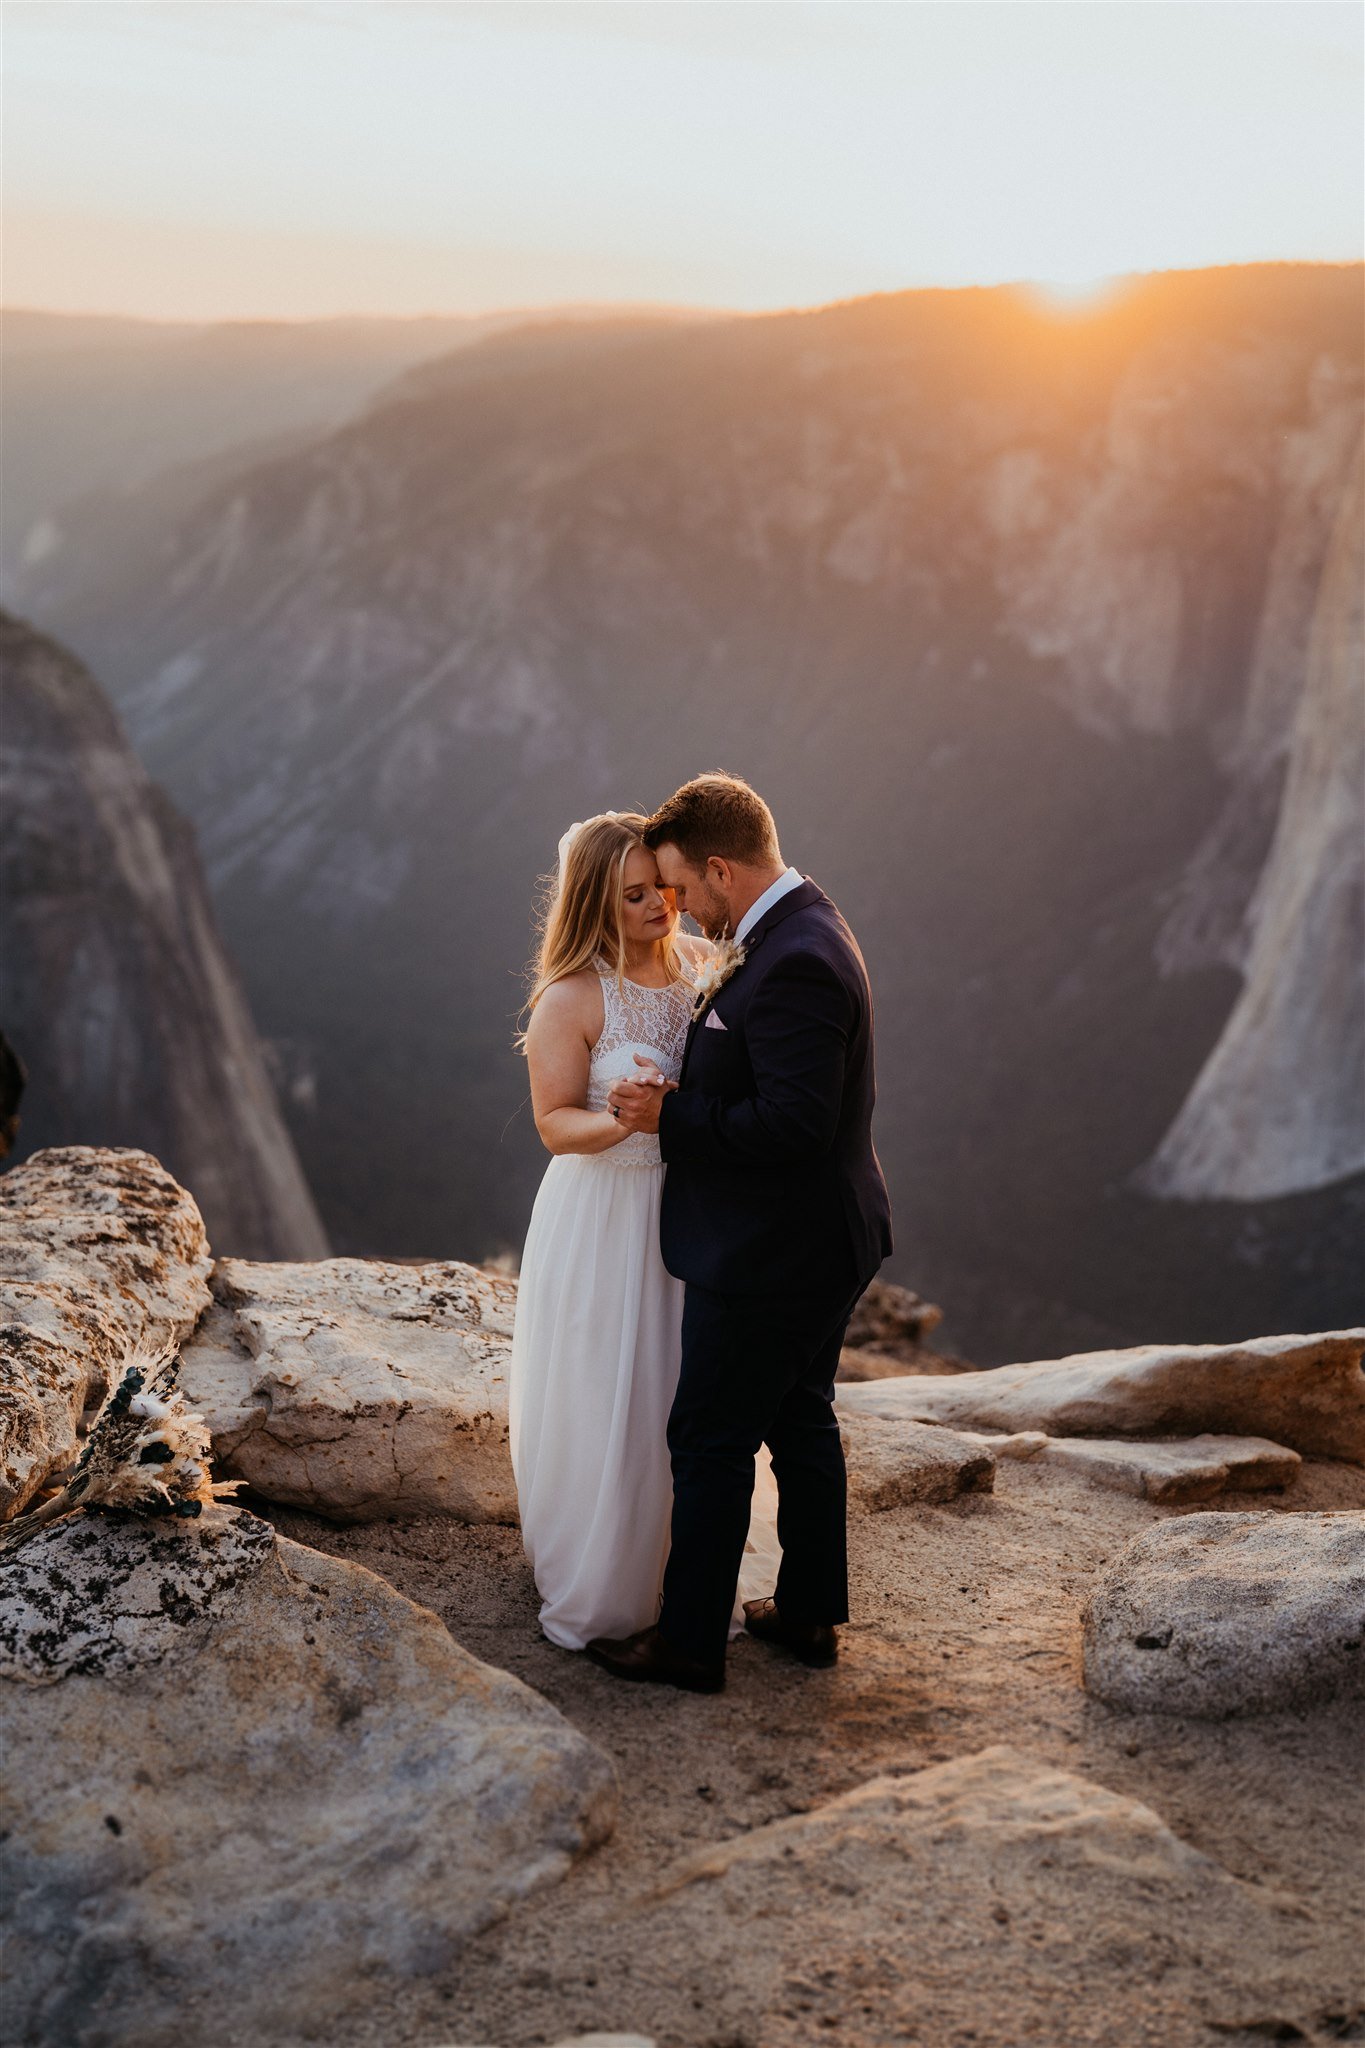 The-Sweetest-Yosemite-National-Park-Adventure-Elopement-With-Pets-73.jpg